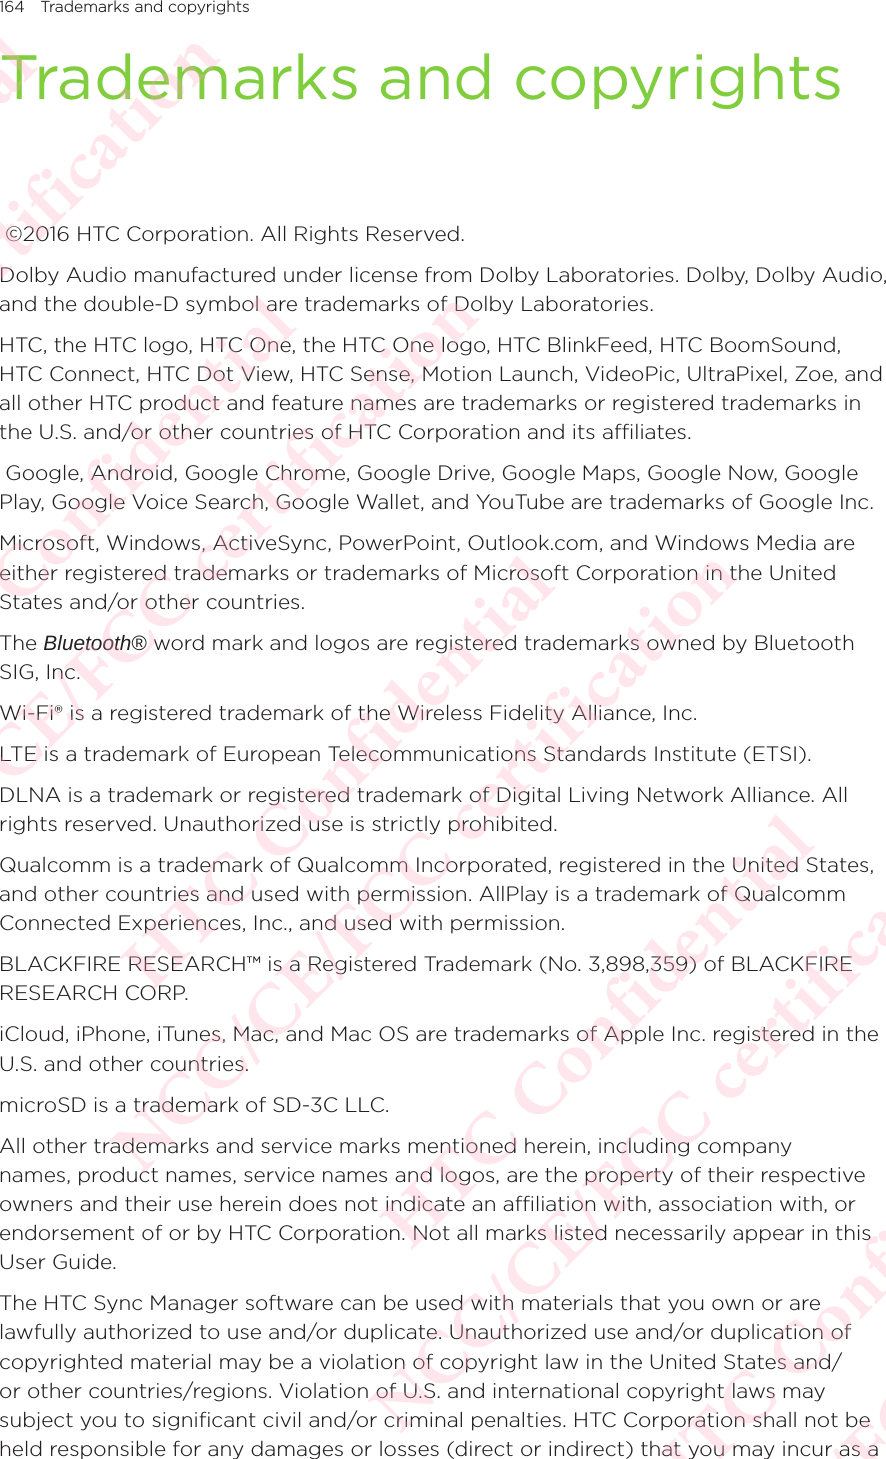 164 Trademarks and copyrightsTrademarks and copyrights ©2016 HTC Corporation. All Rights Reserved. Dolby Audio manufactured under license from Dolby Laboratories. Dolby, Dolby Audio, and the double-D symbol are trademarks of Dolby Laboratories. HTC, the HTC logo, HTC One, the HTC One logo, HTC BlinkFeed, HTC BoomSound, HTC Connect, HTC Dot View, HTC Sense, Motion Launch, VideoPic, UltraPixel, Zoe, and all other HTC product and feature names are trademarks or registered trademarks in the U.S. and/or other countries of HTC Corporation and its affiliates.  Google, Android, Google Chrome, Google Drive, Google Maps, Google Now, Google Play, Google Voice Search, Google Wallet, and YouTube are trademarks of Google Inc. Microsoft, Windows, ActiveSync, PowerPoint, Outlook.com, and Windows Media are either registered trademarks or trademarks of Microsoft Corporation in the United States and/or other countries. The Bluetooth® word mark and logos are registered trademarks owned by Bluetooth SIG, Inc. Wi-Fi® is a registered trademark of the Wireless Fidelity Alliance, Inc. LTE is a trademark of European Telecommunications Standards Institute (ETSI). DLNA is a trademark or registered trademark of Digital Living Network Alliance. All rights reserved. Unauthorized use is strictly prohibited. Qualcomm is a trademark of Qualcomm Incorporated, registered in the United States, and other countries and used with permission. AllPlay is a trademark of Qualcomm Connected Experiences, Inc., and used with permission. BLACKFIRE RESEARCH™ is a Registered Trademark (No. 3,898,359) of BLACKFIRE RESEARCH CORP. iCloud, iPhone, iTunes, Mac, and Mac OS are trademarks of Apple Inc. registered in the U.S. and other countries. microSD is a trademark of SD-3C LLC. All other trademarks and service marks mentioned herein, including company names, product names, service names and logos, are the property of their respective owners and their use herein does not indicate an affiliation with, association with, or endorsement of or by HTC Corporation. Not all marks listed necessarily appear in this User Guide. The HTC Sync Manager software can be used with materials that you own or are lawfully authorized to use and/or duplicate. Unauthorized use and/or duplication of copyrighted material may be a violation of copyright law in the United States and/or other countries/regions. Violation of U.S. and international copyright laws may subject you to significant civil and/or criminal penalties. HTC Corporation shall not be held responsible for any damages or losses (direct or indirect) that you may incur as a HTC Confidential NCC/CE/FCC certification  HTC Confidential NCC/CE/FCC certification  HTC Confidential NCC/CE/FCC certification  HTC Confidential NCC/CE/FCC certification  HTC Confidential NCC/CE/FCC certification